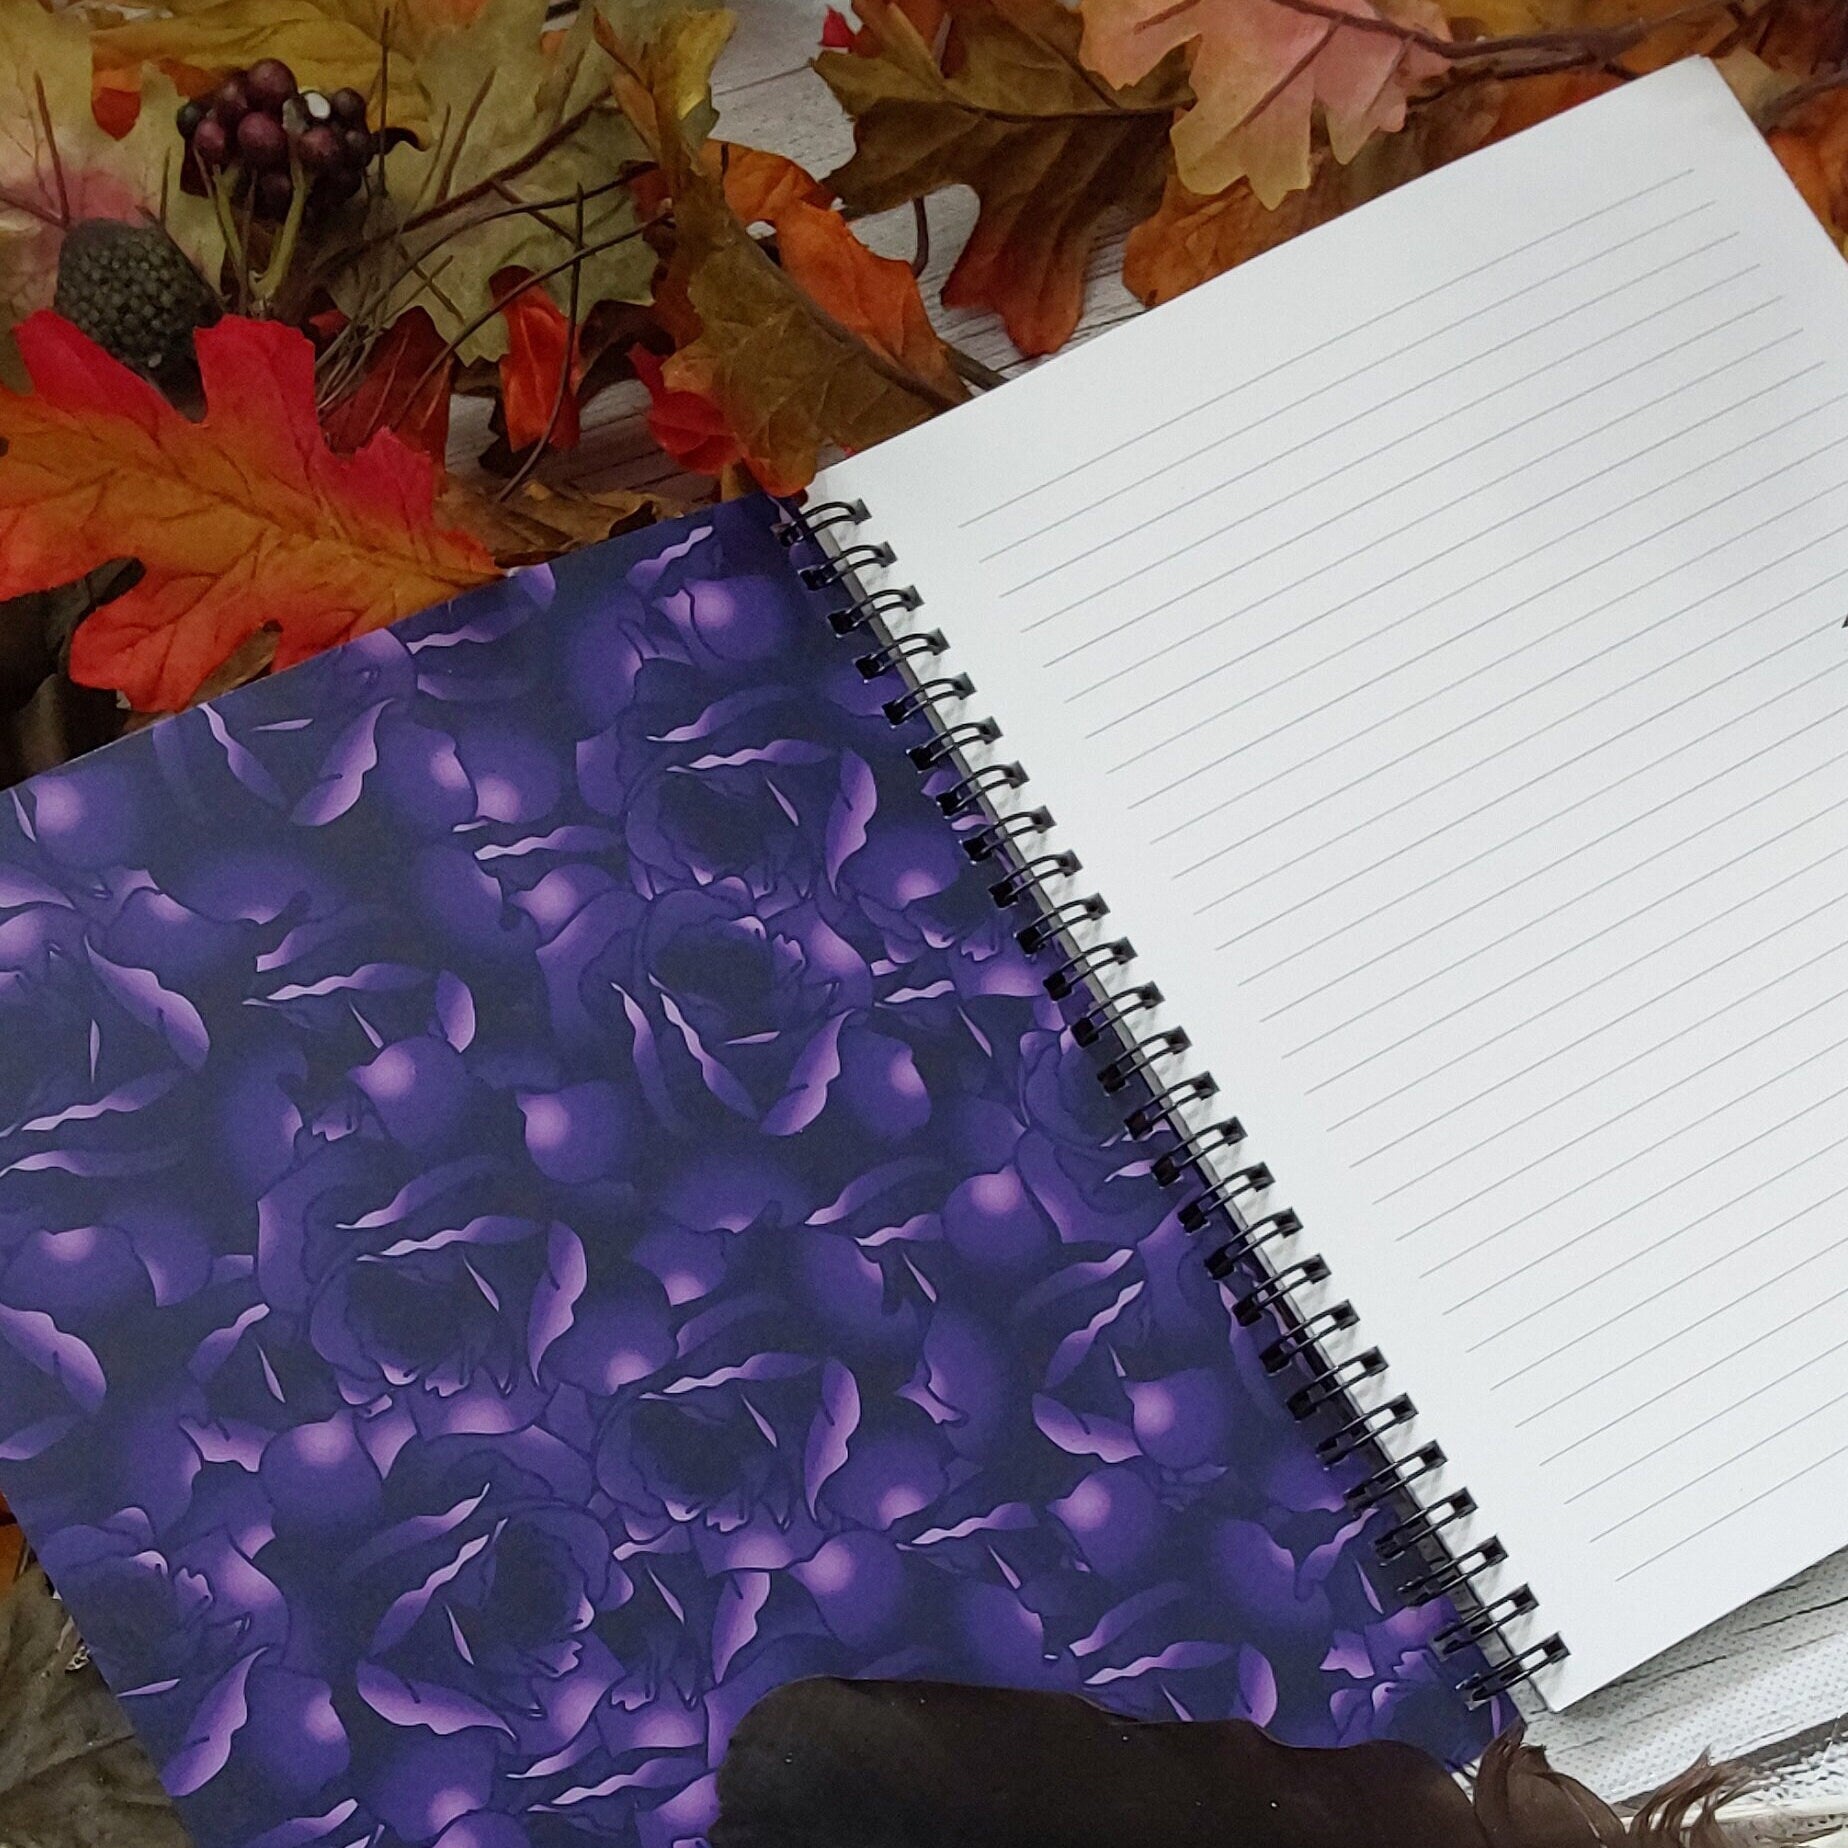 SPIRAL NOTEBOOK: 'Become a Witch Worth Burning' Coffin , Purple Coffin Spiral Notebook , Witchy Purple Coffin Notebook , Witchy Coffin